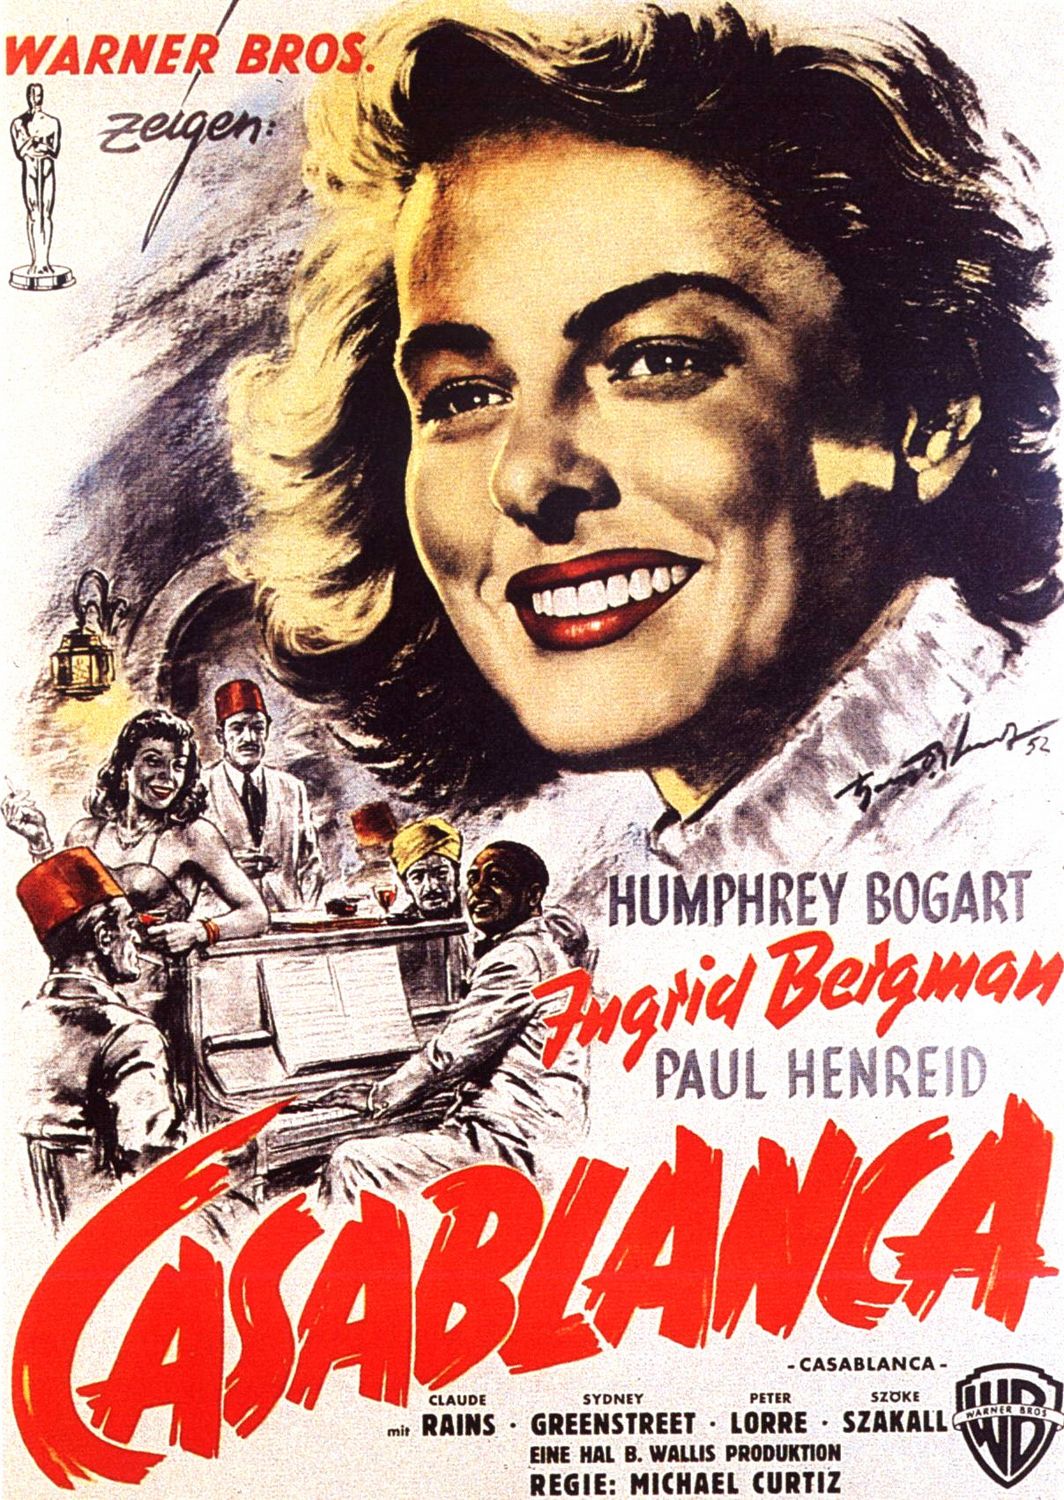 Extra Large Movie Poster Image for Casablanca (#4 of 7)